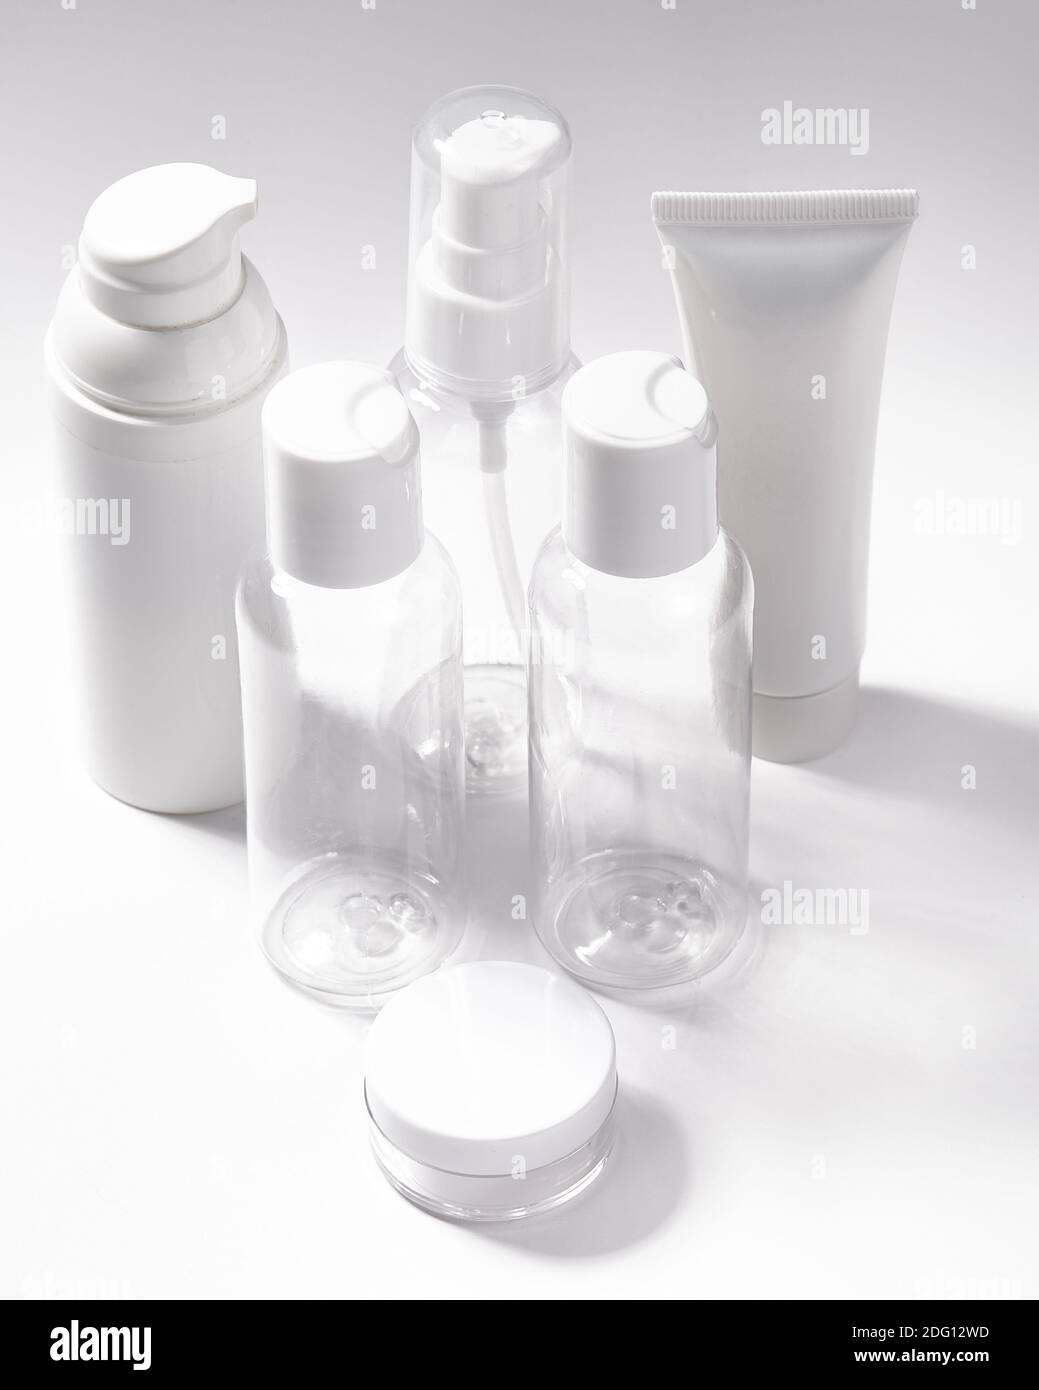 White cosmetic bottles on white background. Wellness, spa and body care bottles collection. Beauty treatment, bathroom set Stock Photo